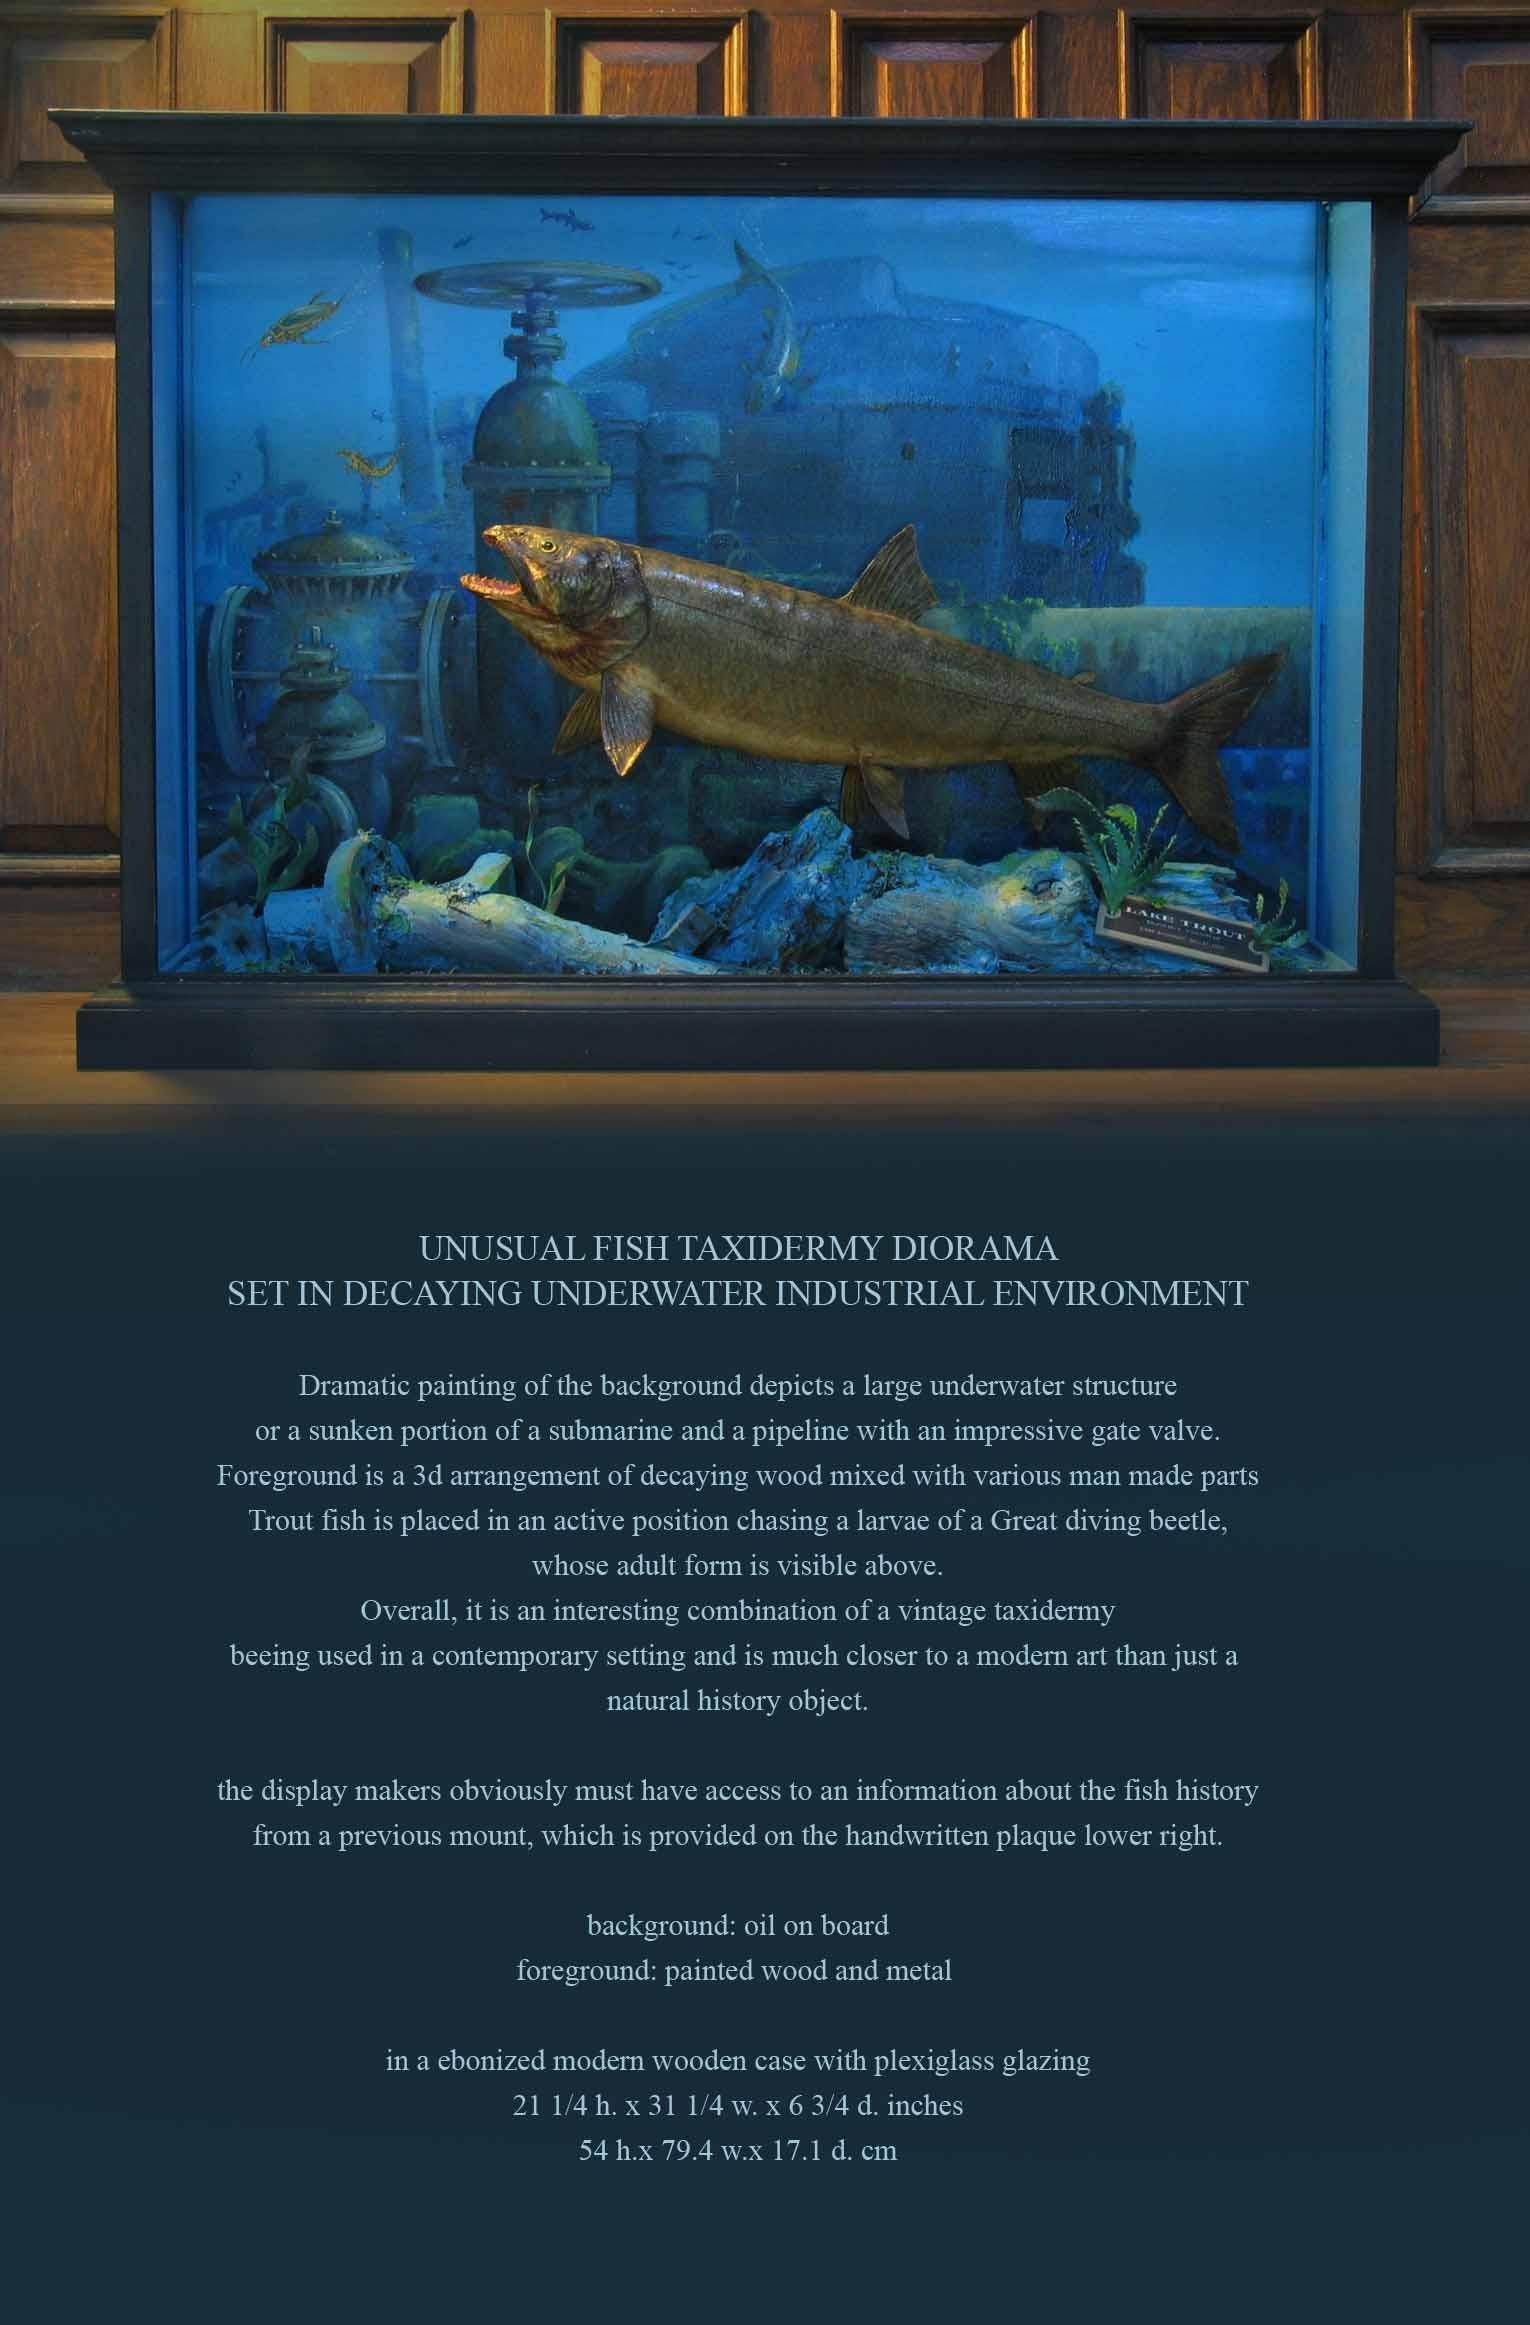 Unusual fish taxidermy diorama set in decaying underwater industrial environment.

 A dramatic painting in the background depicts a large underwater structure or a sunken portion of a submarine and a pipeline with an impressive gate valve.